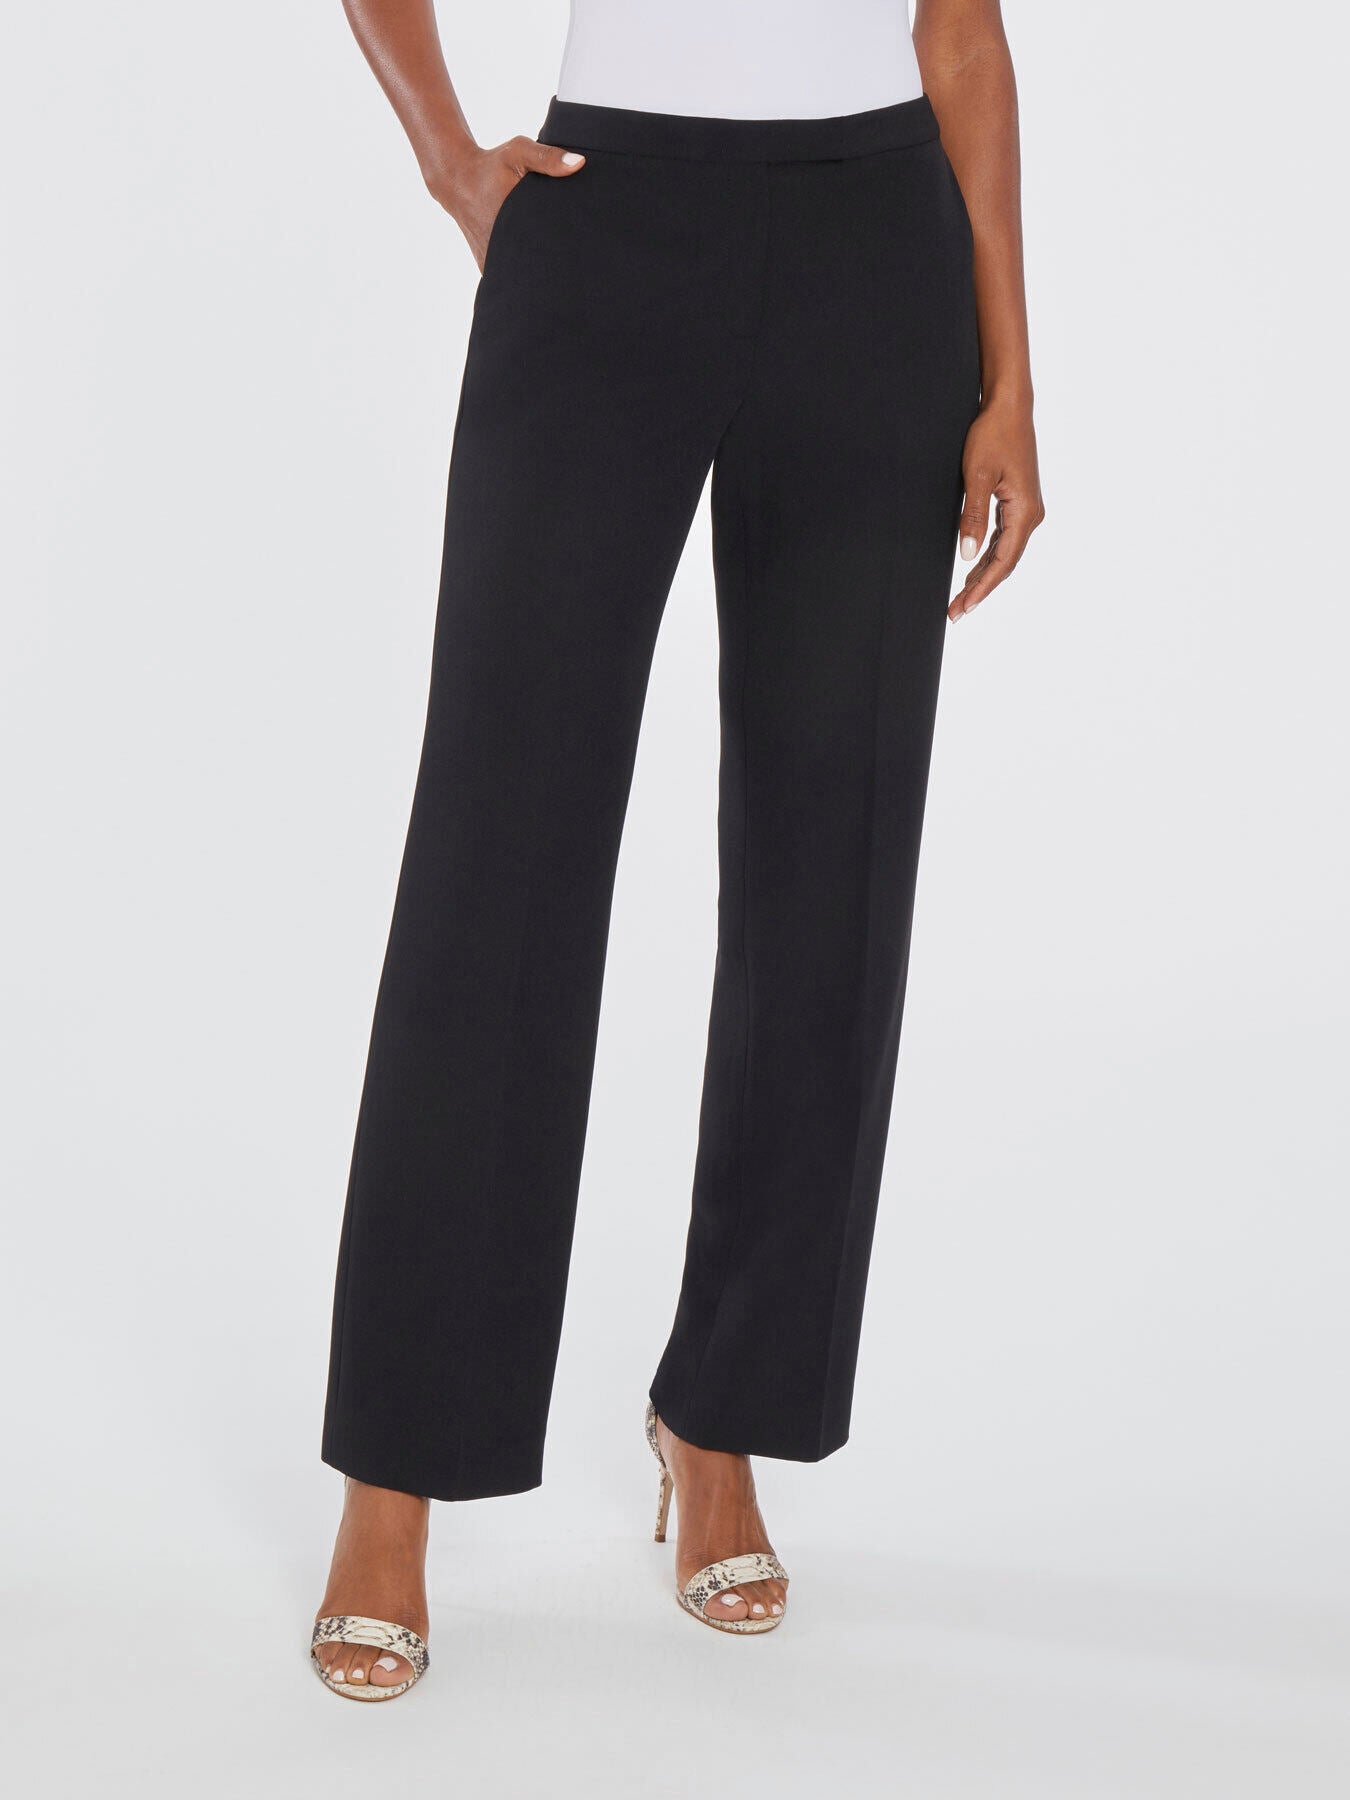 Stretch Crepe Classic Tab-Front Pants